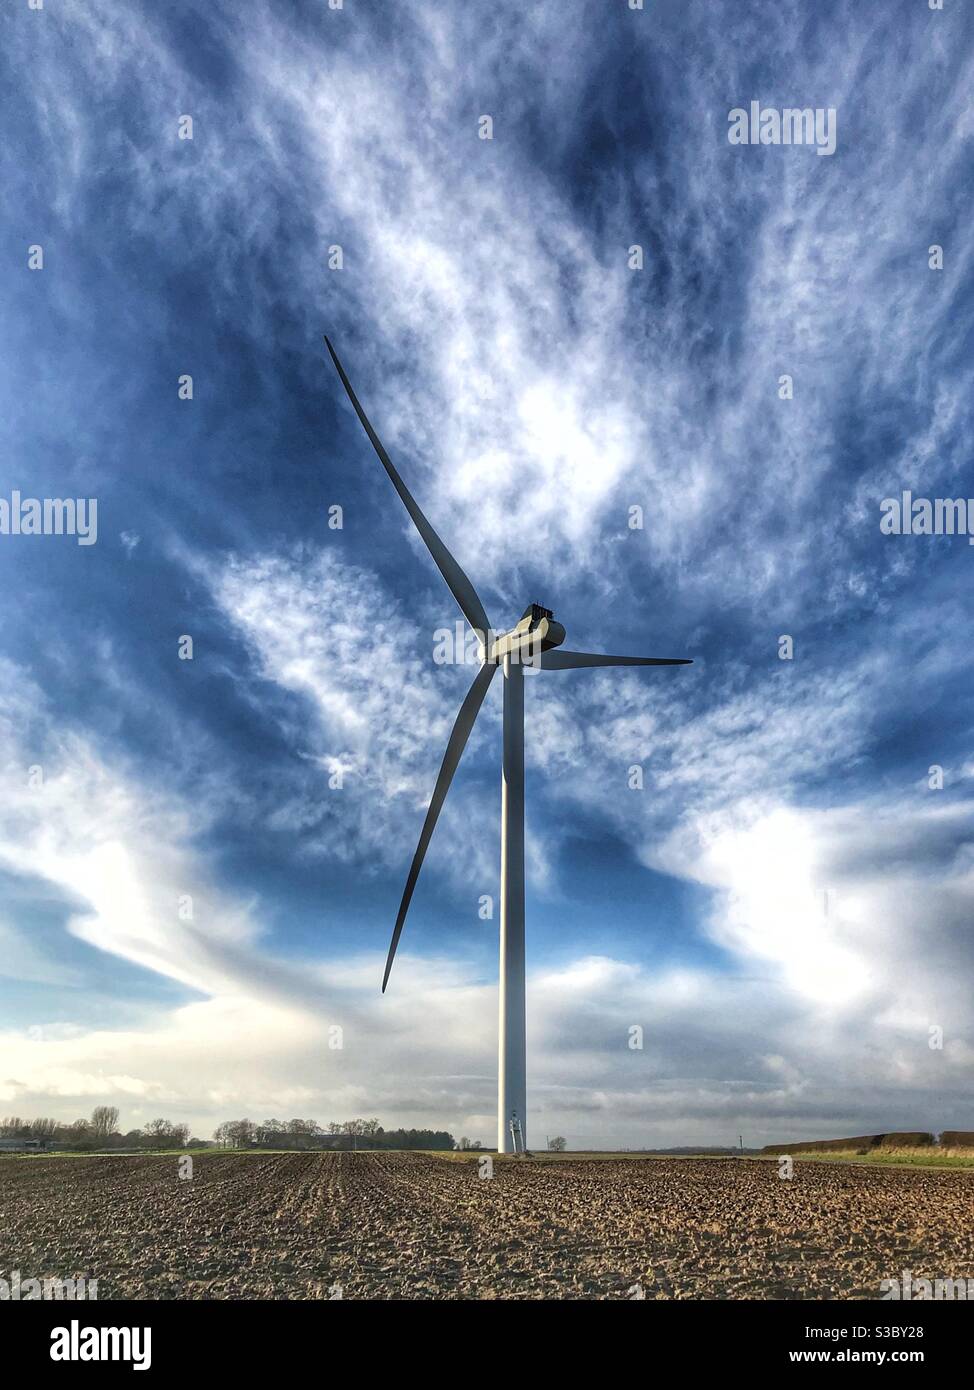 A electricity power generation windmill in a rural countryside environment Stock Photo